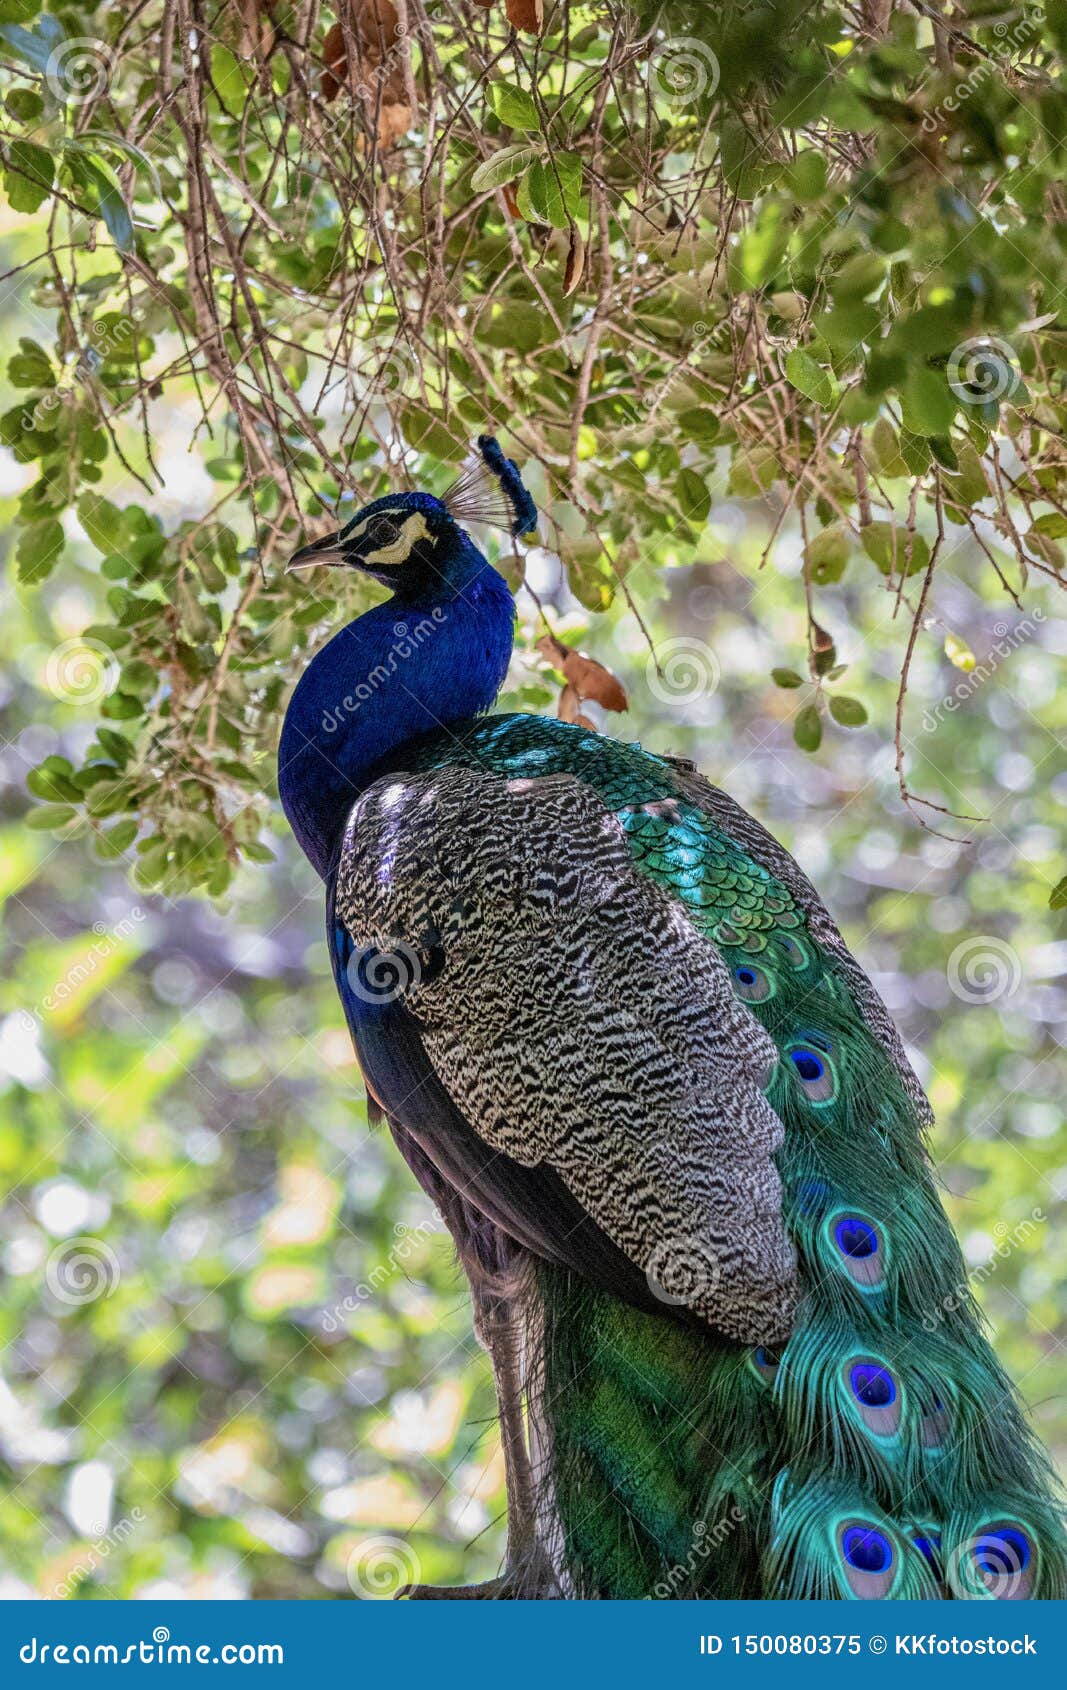 Peacock in a tree stock image. Image of colorful, bird - 150080375